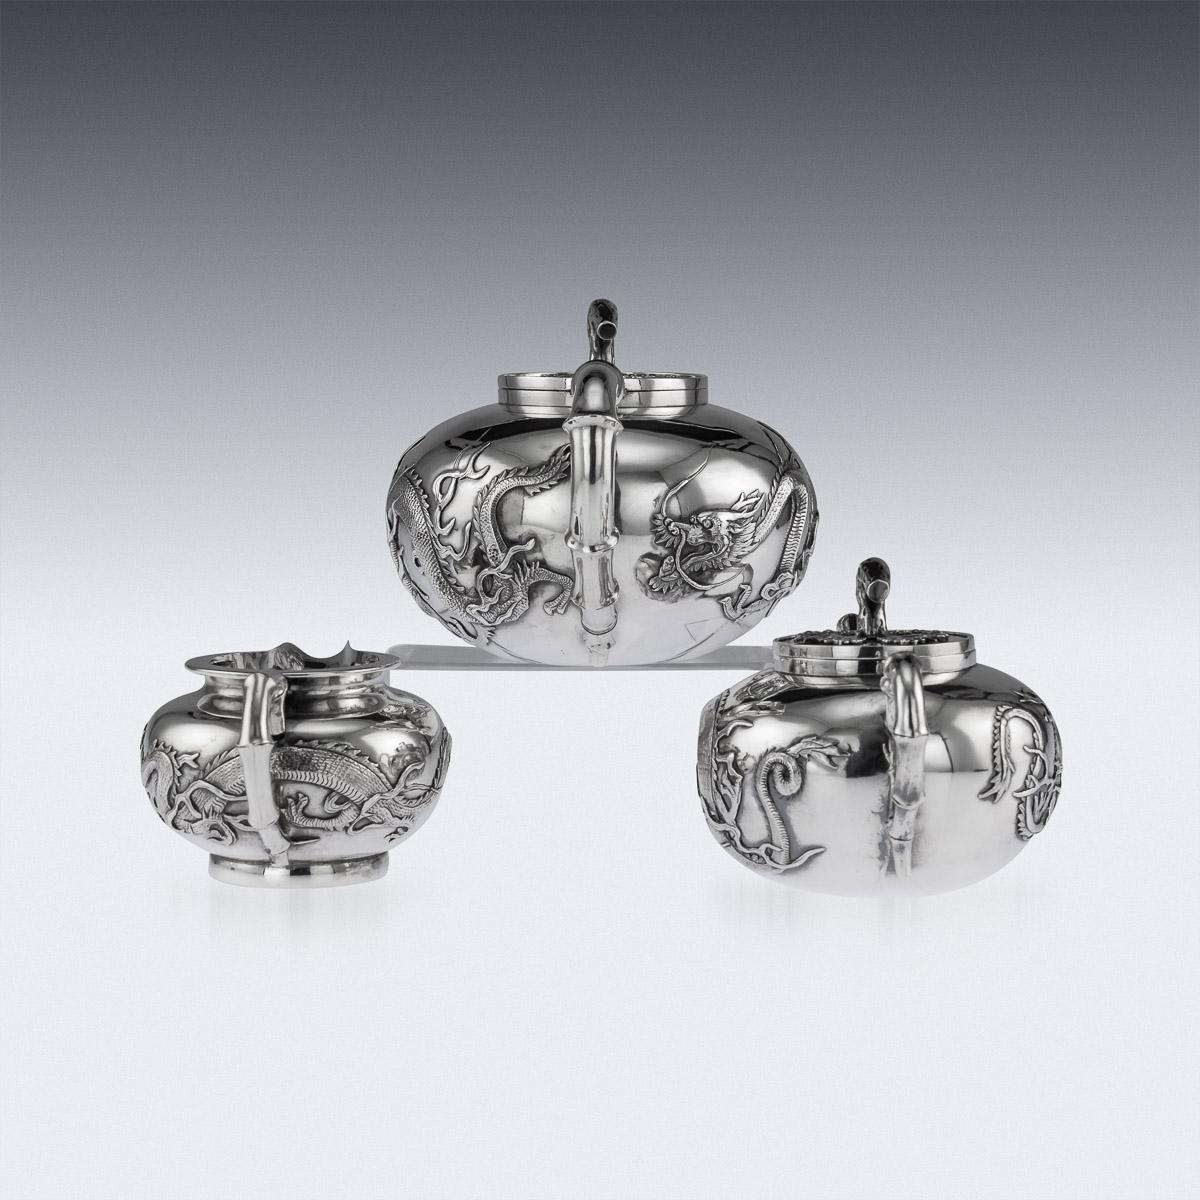 Antique late 19th century Chinese export solid silver three-piece tea set, comprising of teapot, sugar bowl and milk jug, each spherical body applied with exquisite dragons in relief, spout, handle and feet modelled as a bamboo branch and lids